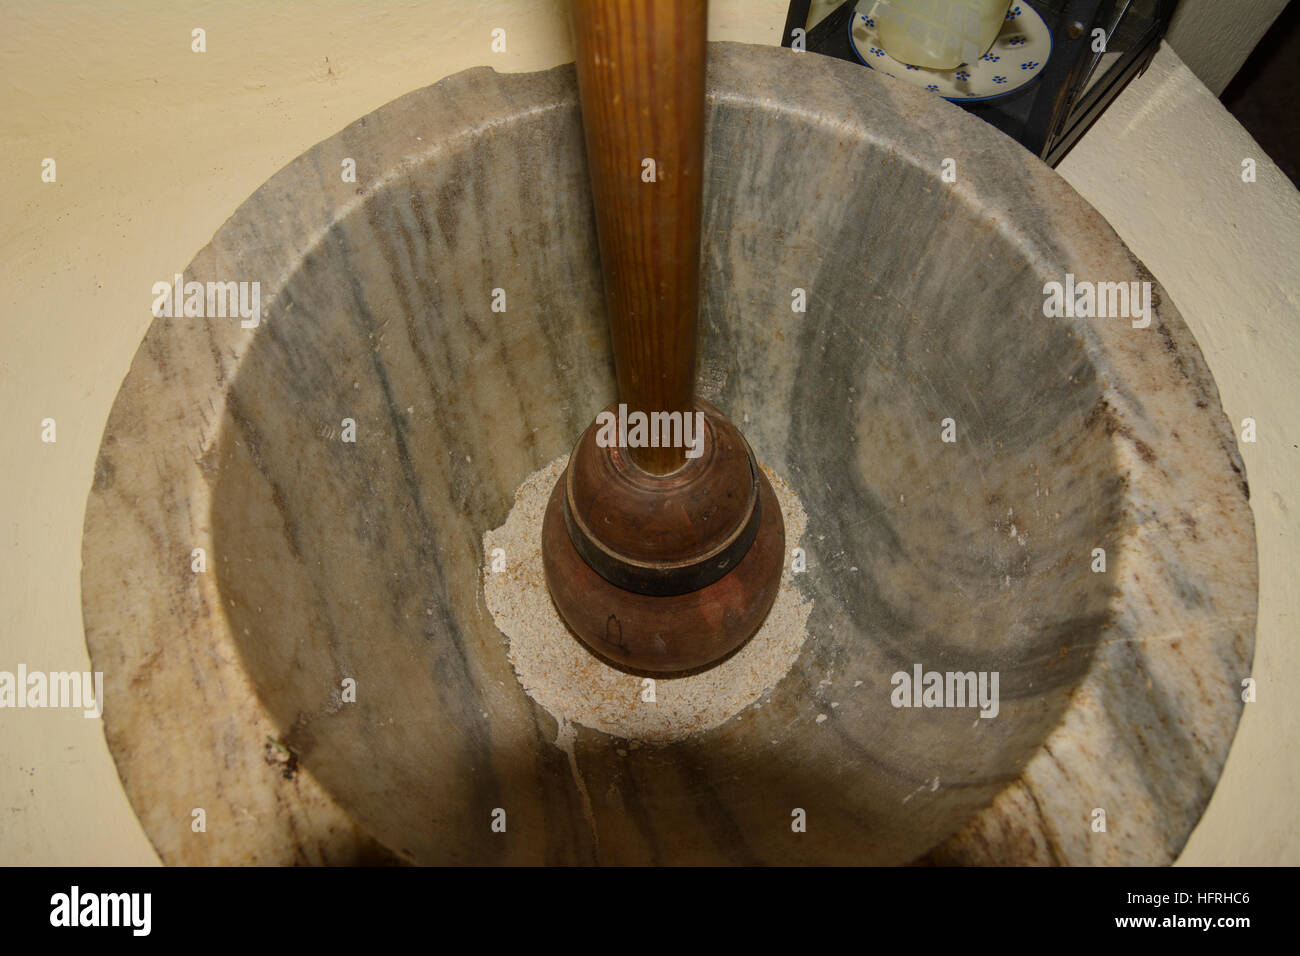 mortar to grind malt for beer production, Sachsen, Saxony, Germany Stock Photo